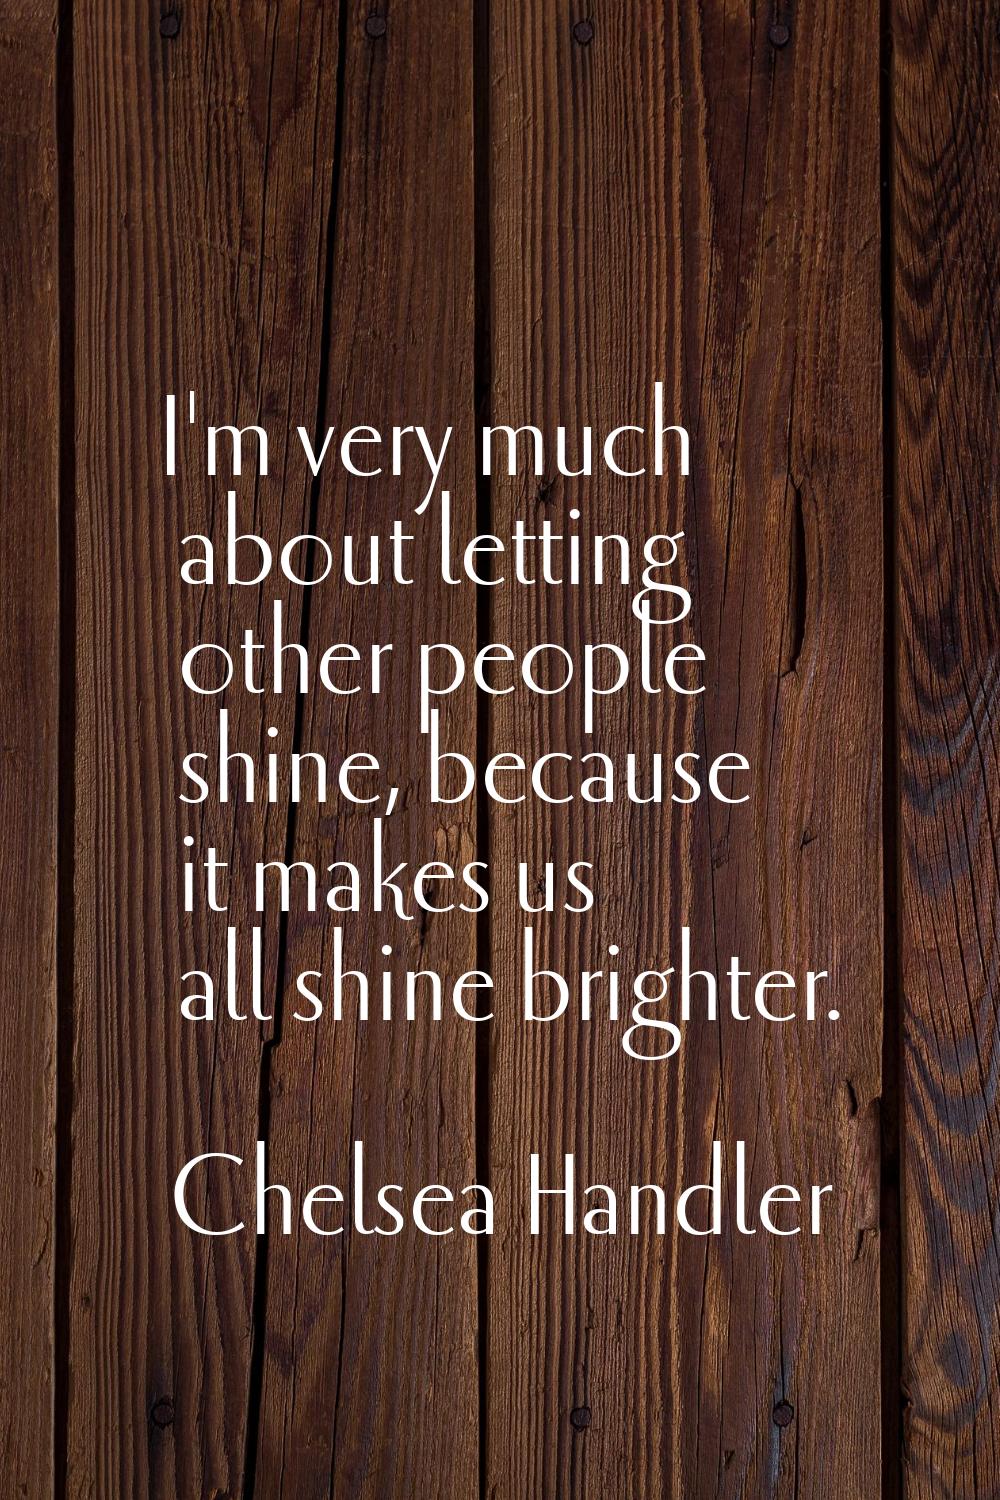 I'm very much about letting other people shine, because it makes us all shine brighter.